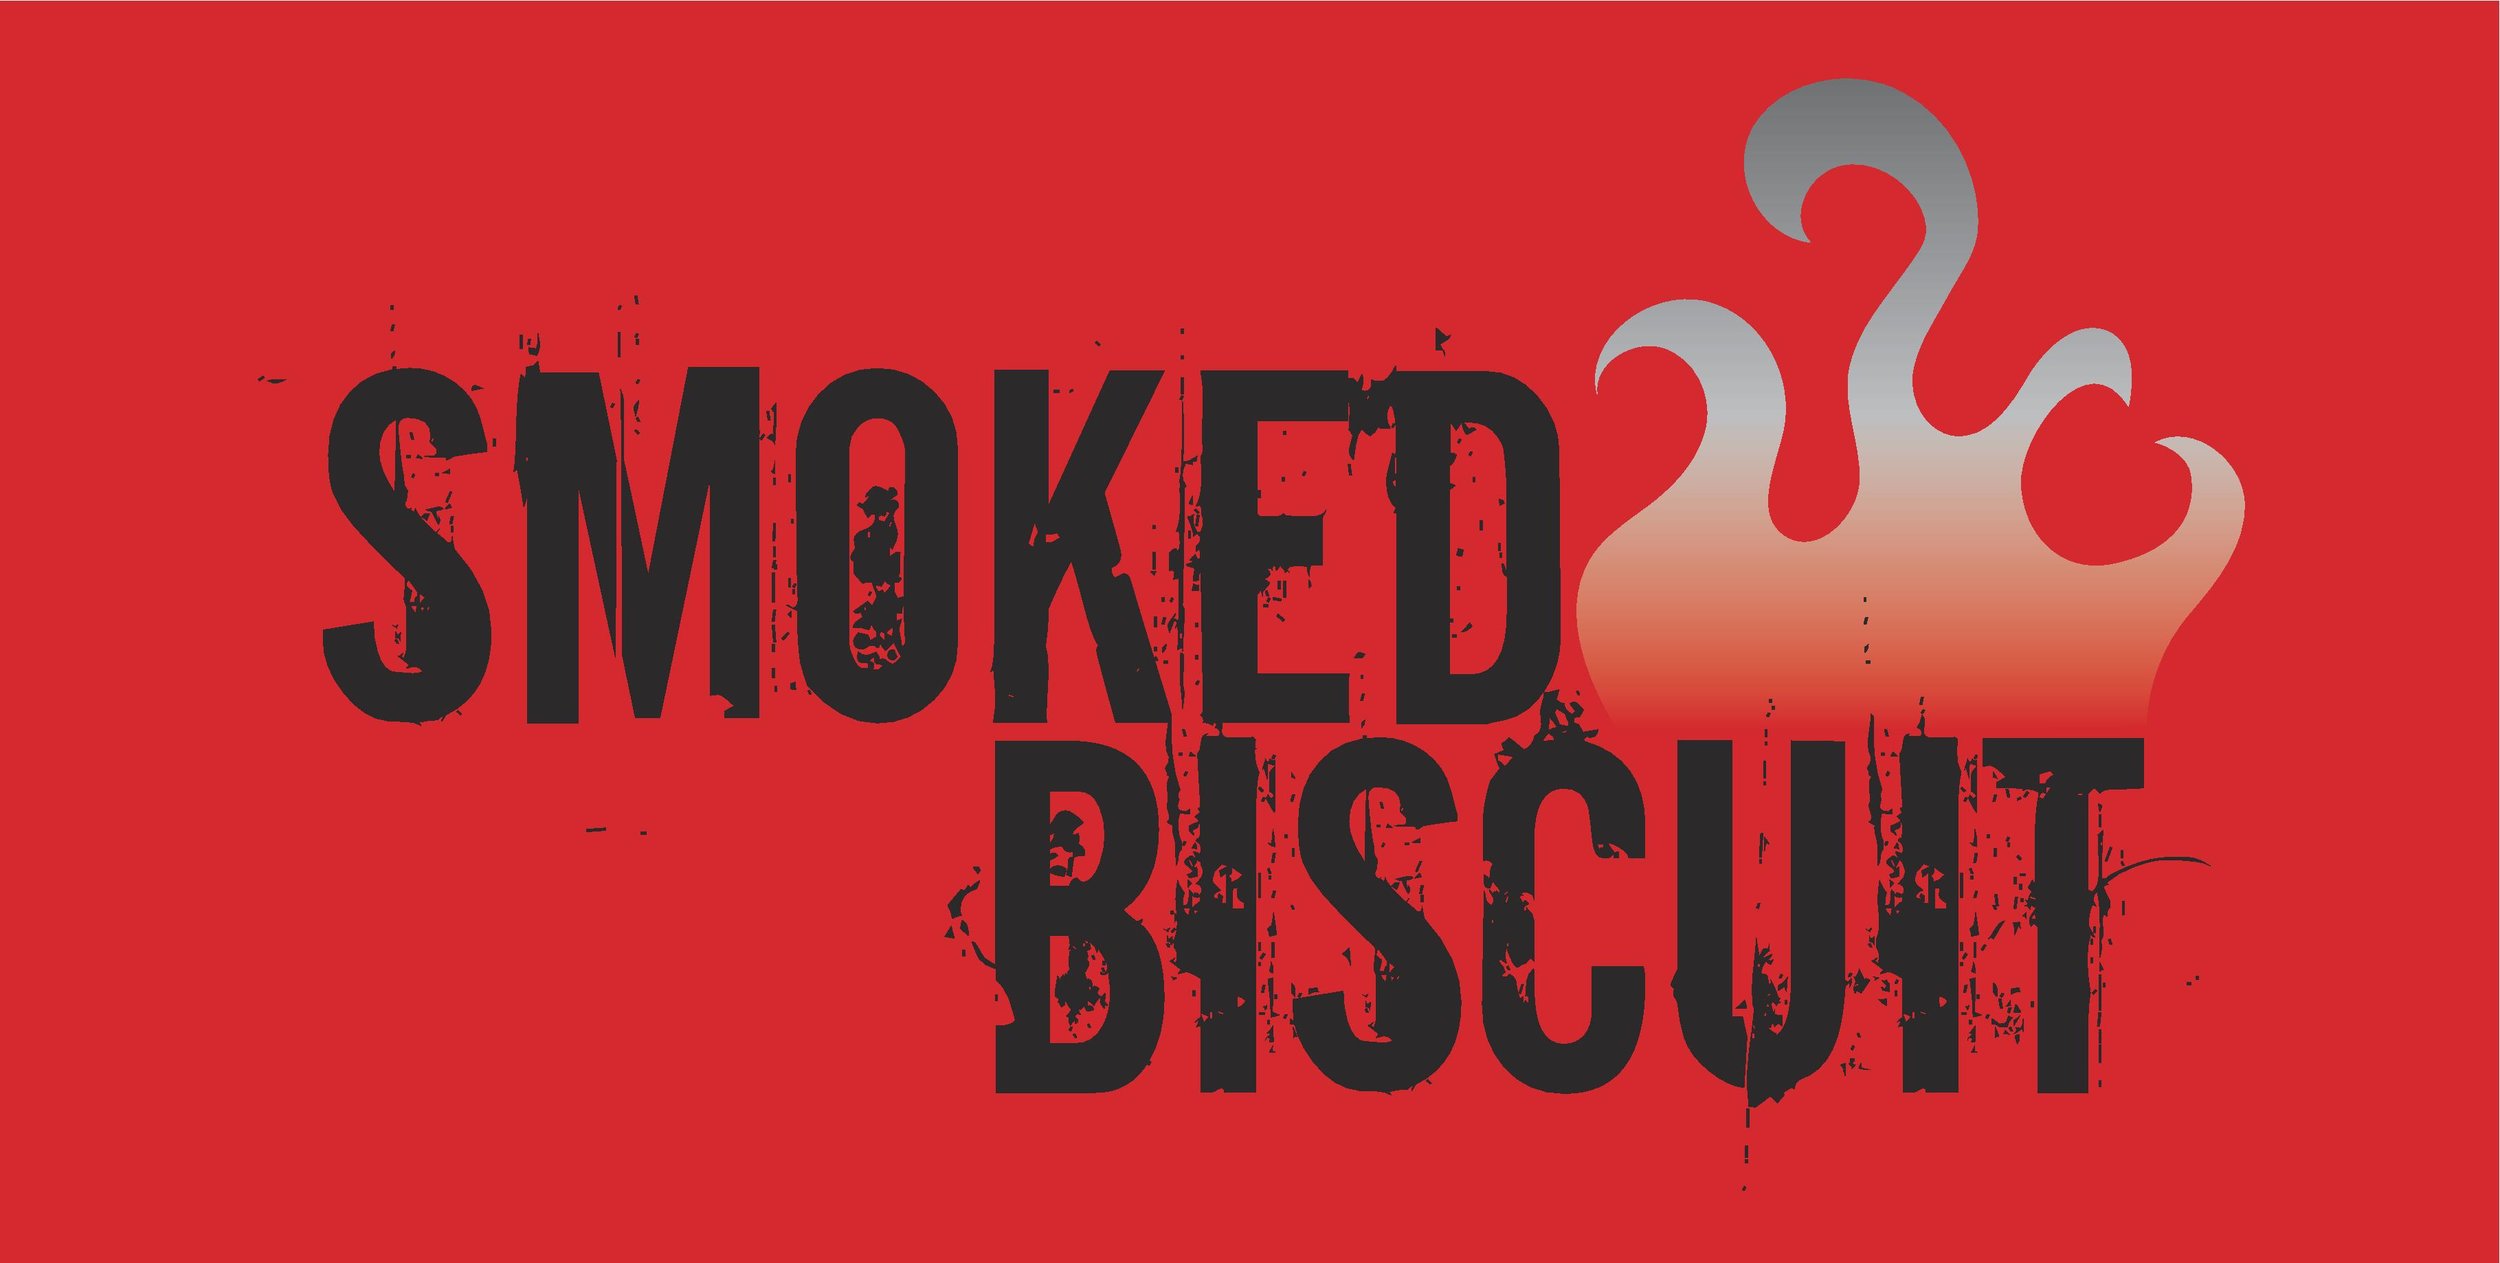 Smoked Biscuit, Inc.